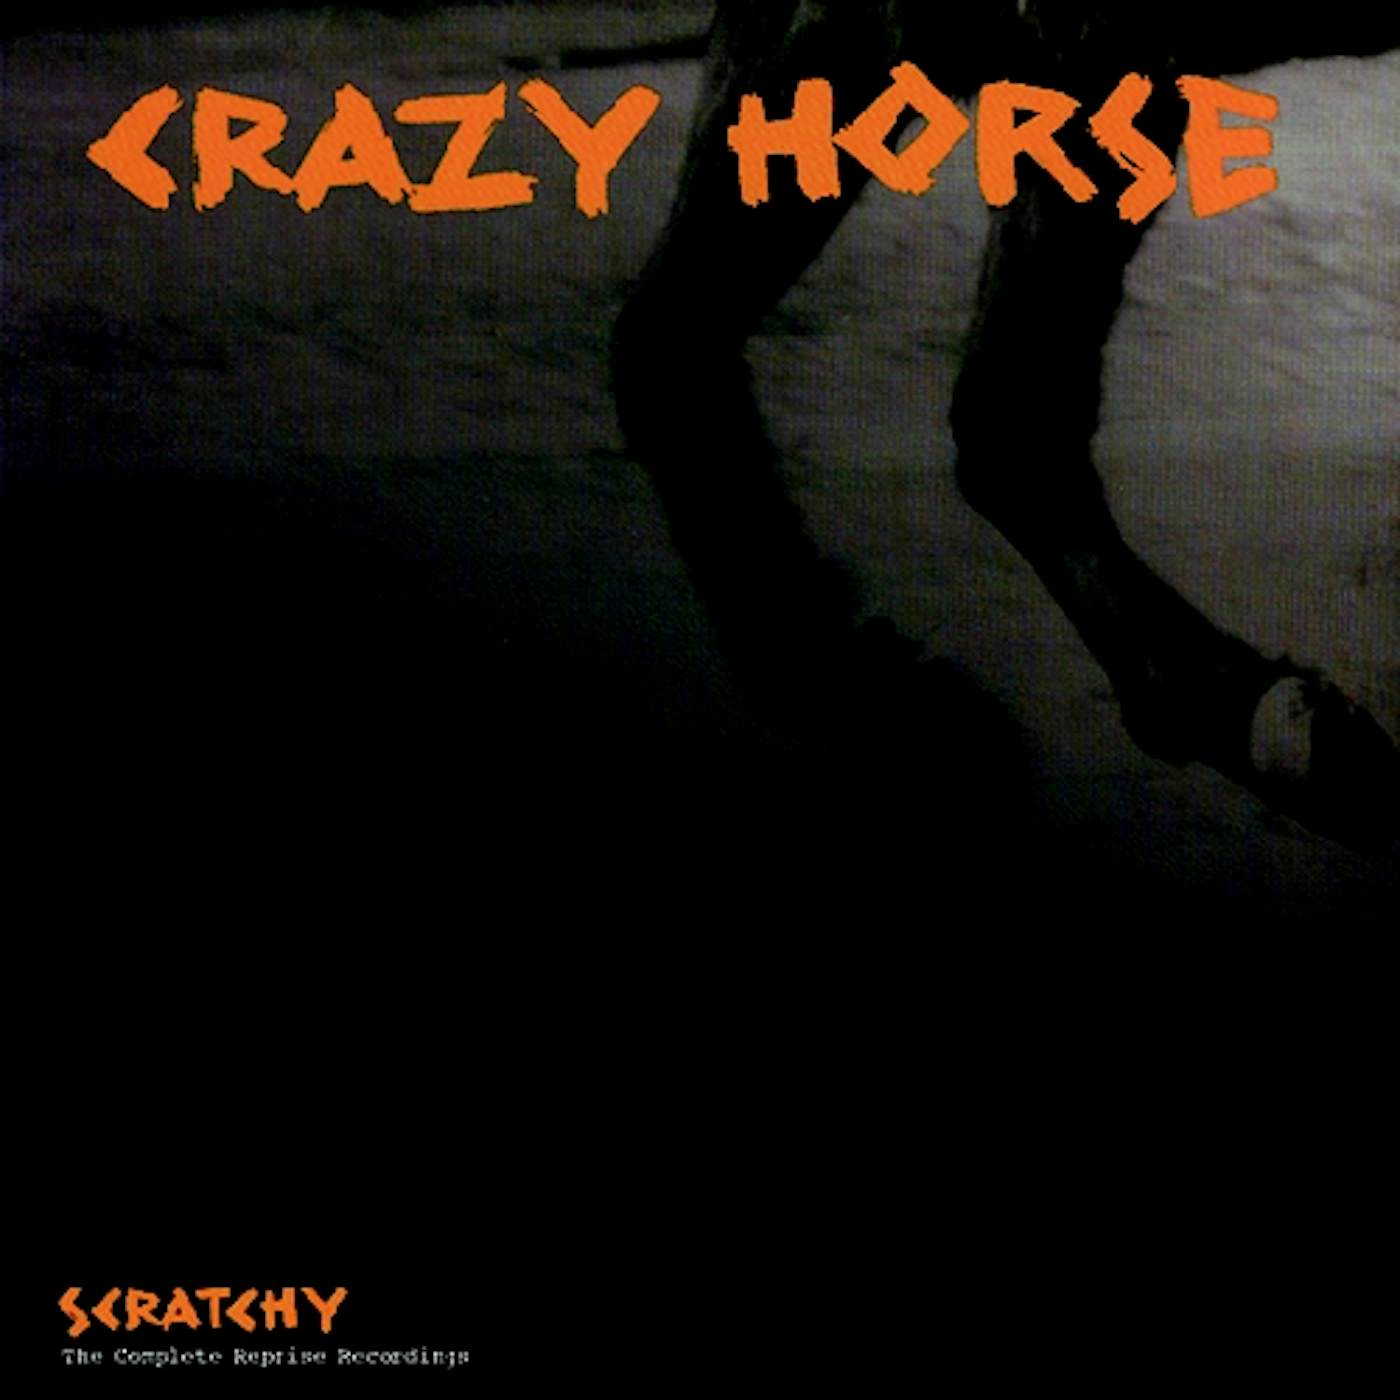 Crazy Horse SCRATCHY: THE COMPLETE REPRISE RECORDINGS (2 CD) CD